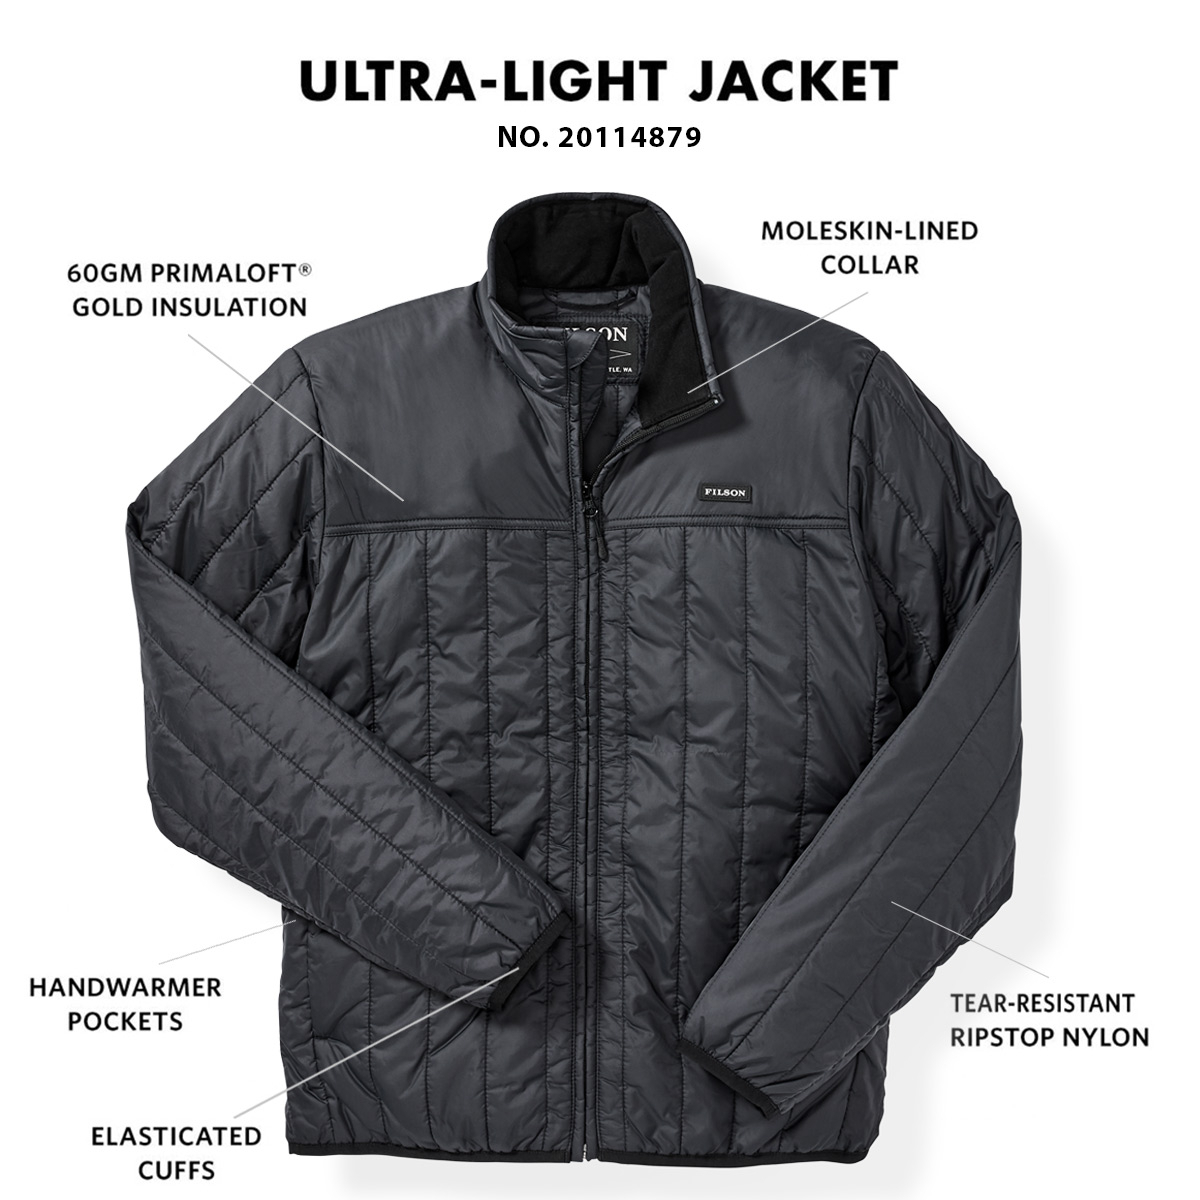 LIGHTSPEED Jacket in Black Ultra-lightweight and portable poly jacket that  packs into its own pocket.